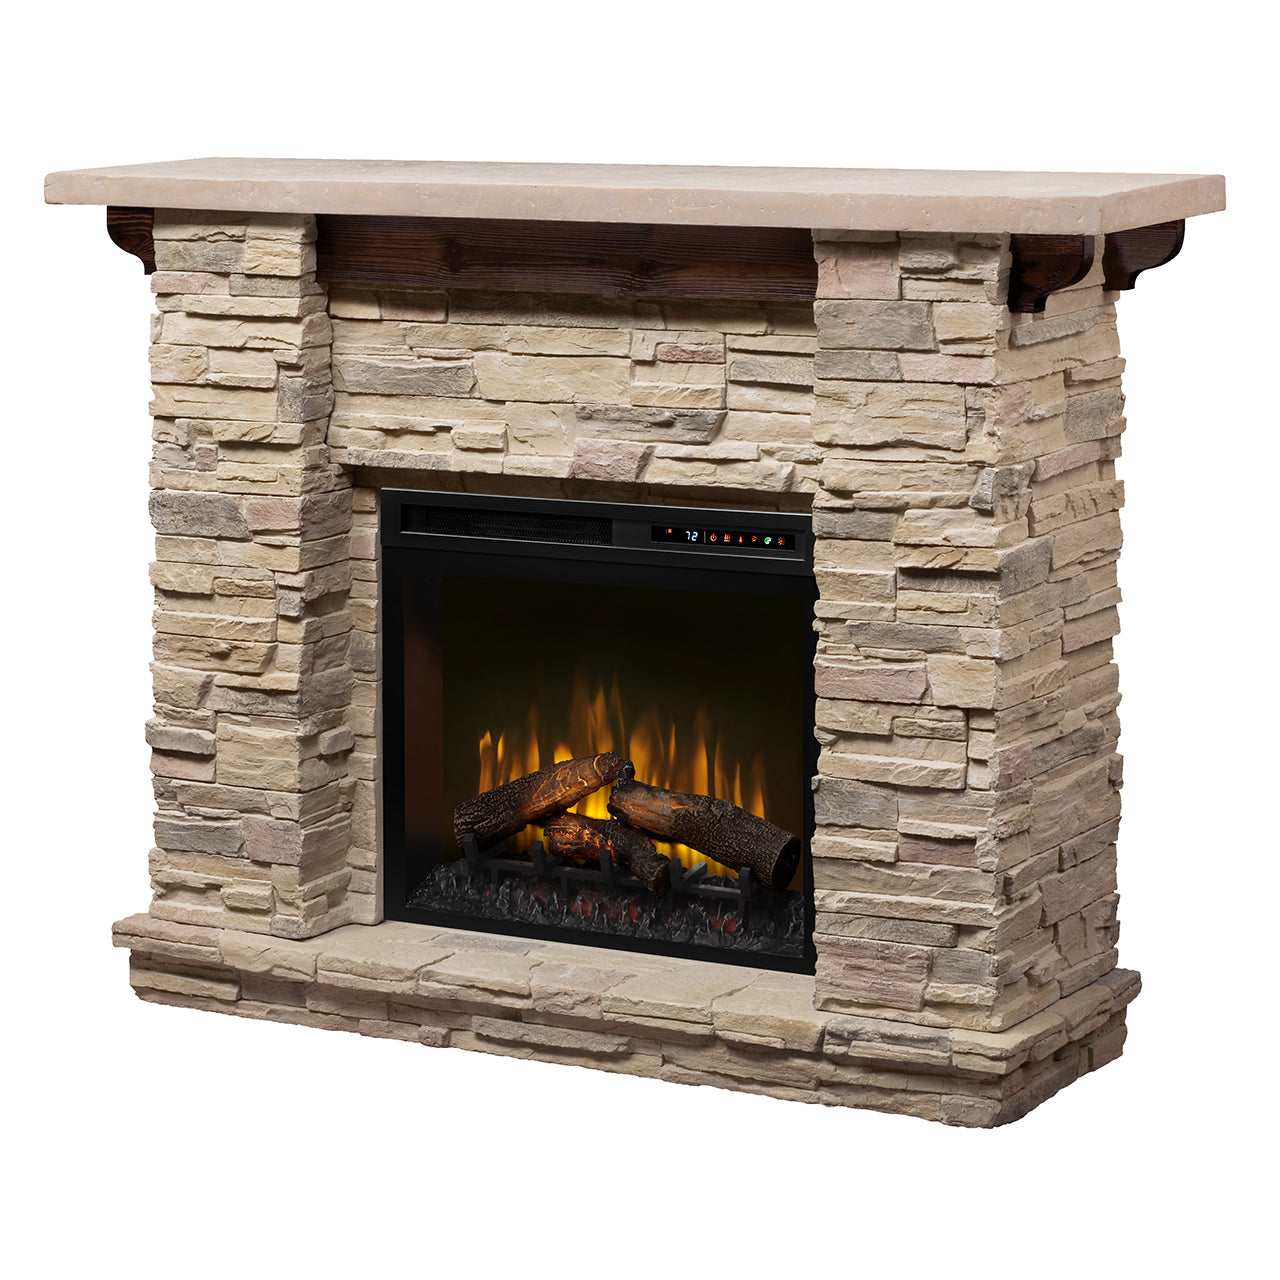 Dimplex Featherson 28-Inch Electric Firebox with 61-Inch Stone-Finish Mantel - GDS28L8-1152LR - Fireplace Choice